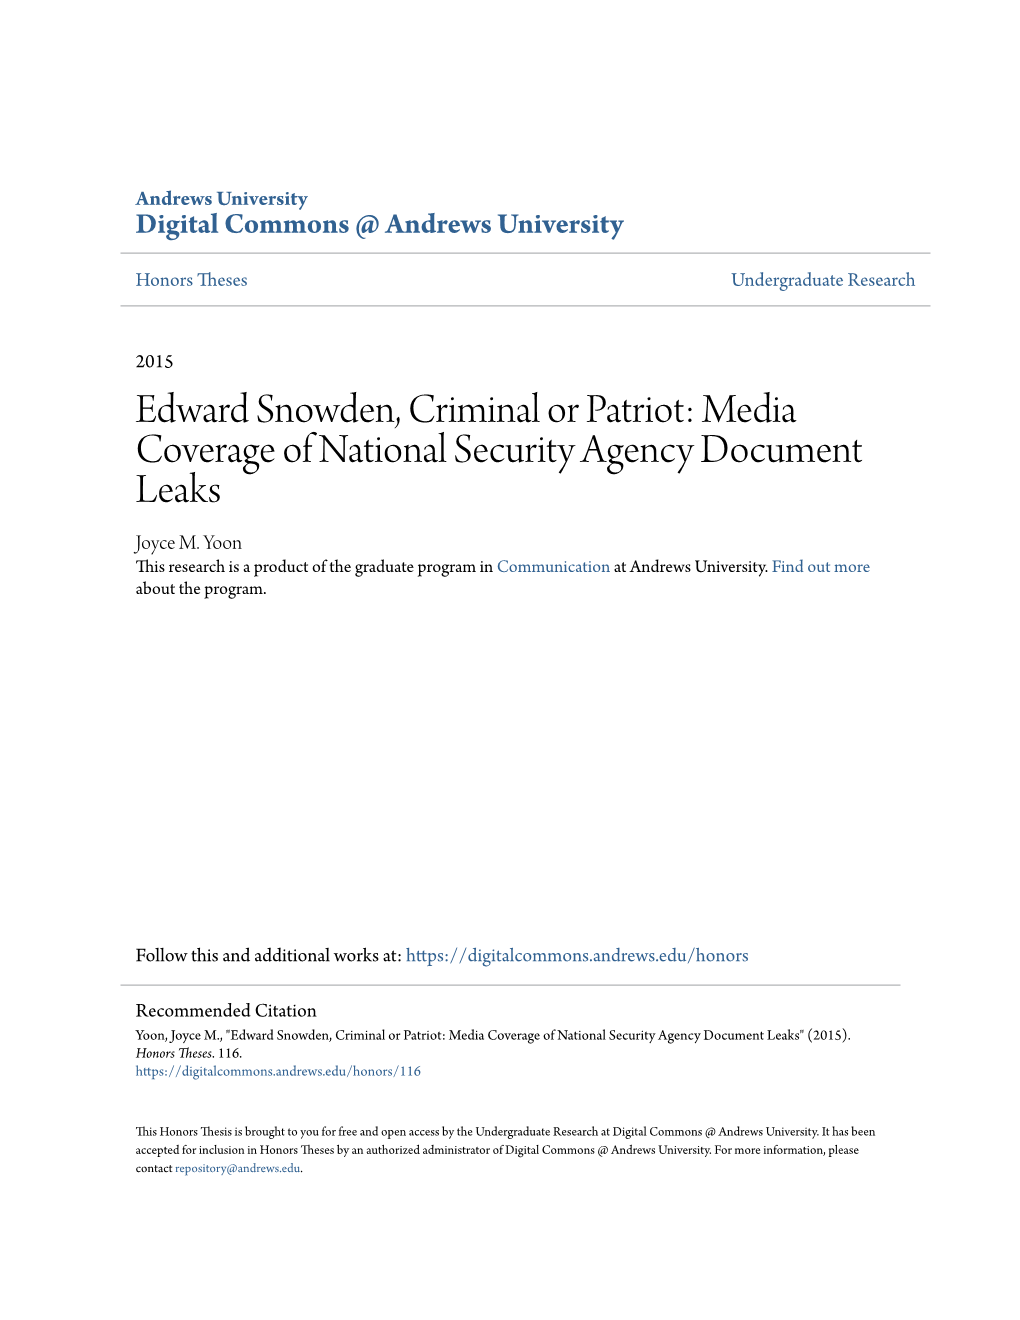 Edward Snowden, Criminal Or Patriot: Media Coverage of National Security Agency Document Leaks Joyce M